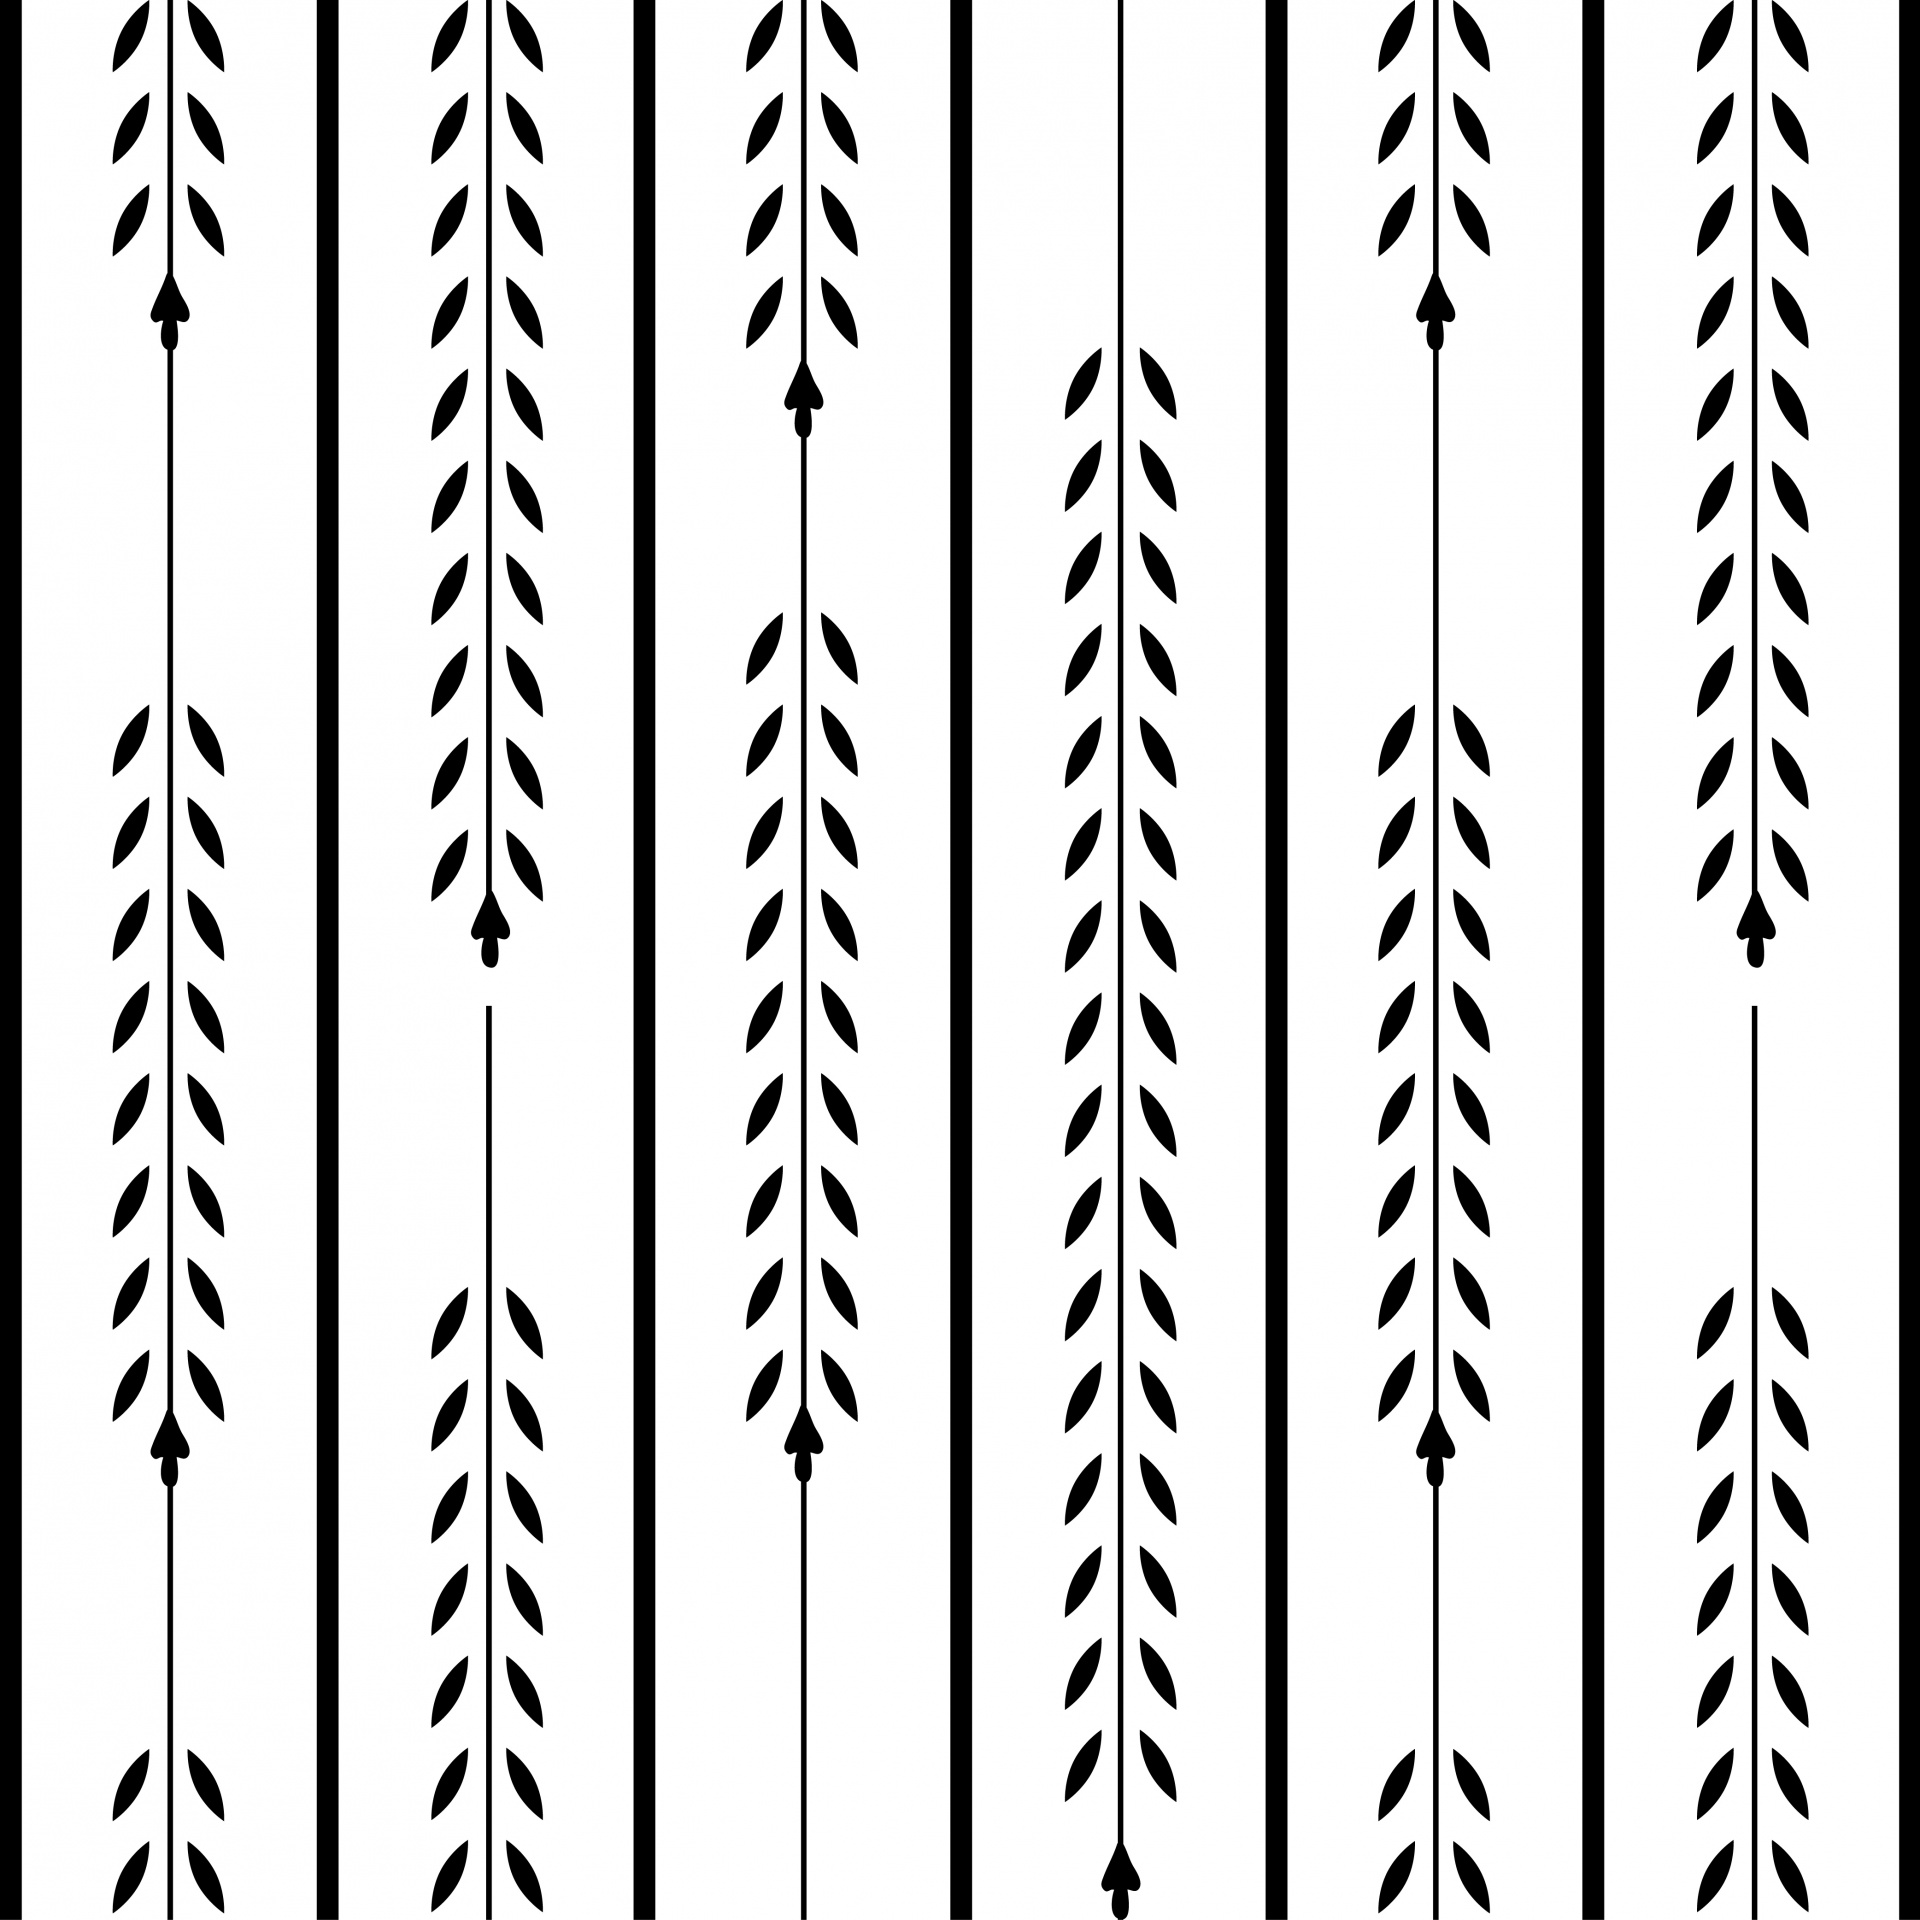 Black and white leaves wallpaper background pattern